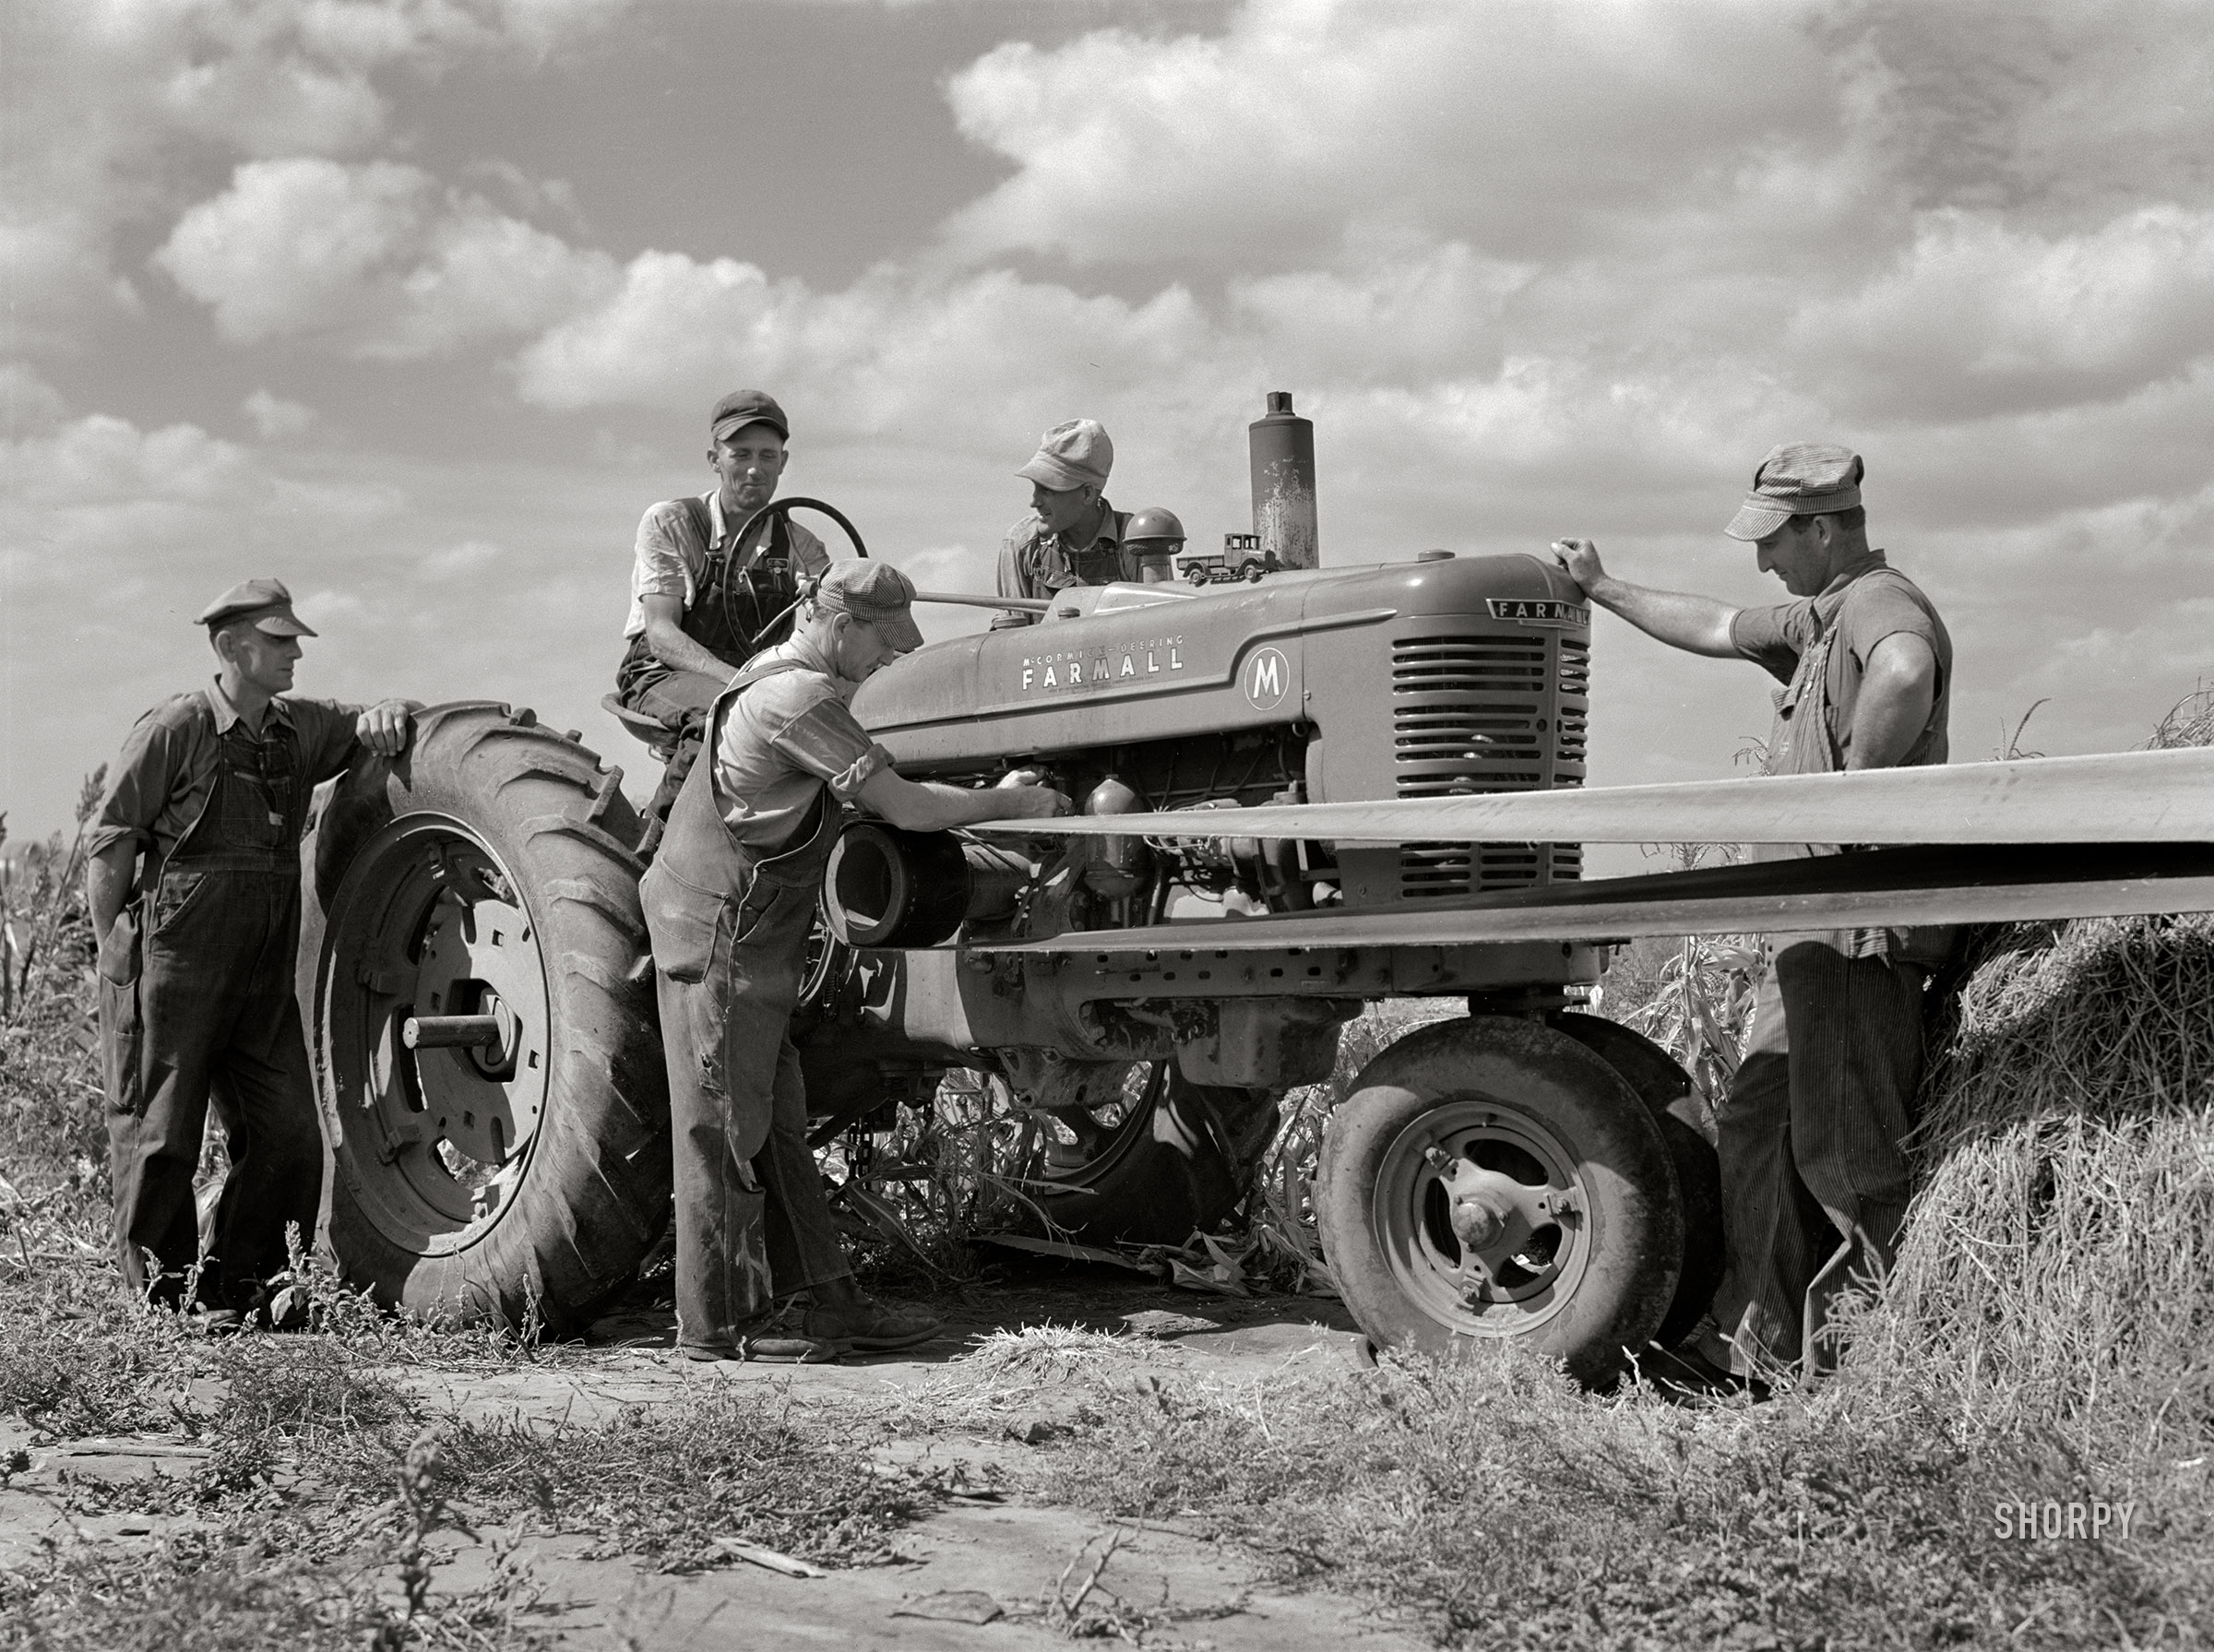 September 1941. Waterloo, Nebraska. "George Leaver, president; Don Shinaut, treasurer; Russell Smith, director; Henry Wollen and Jay Rowell, board of directors of Two River (FSA) Non-Stock Cooperative, looking at demonstration of Farmall 'M' tractor." Medium format acetate negative by Marion Post Wolcott for the Farm Security Administration. View full size.